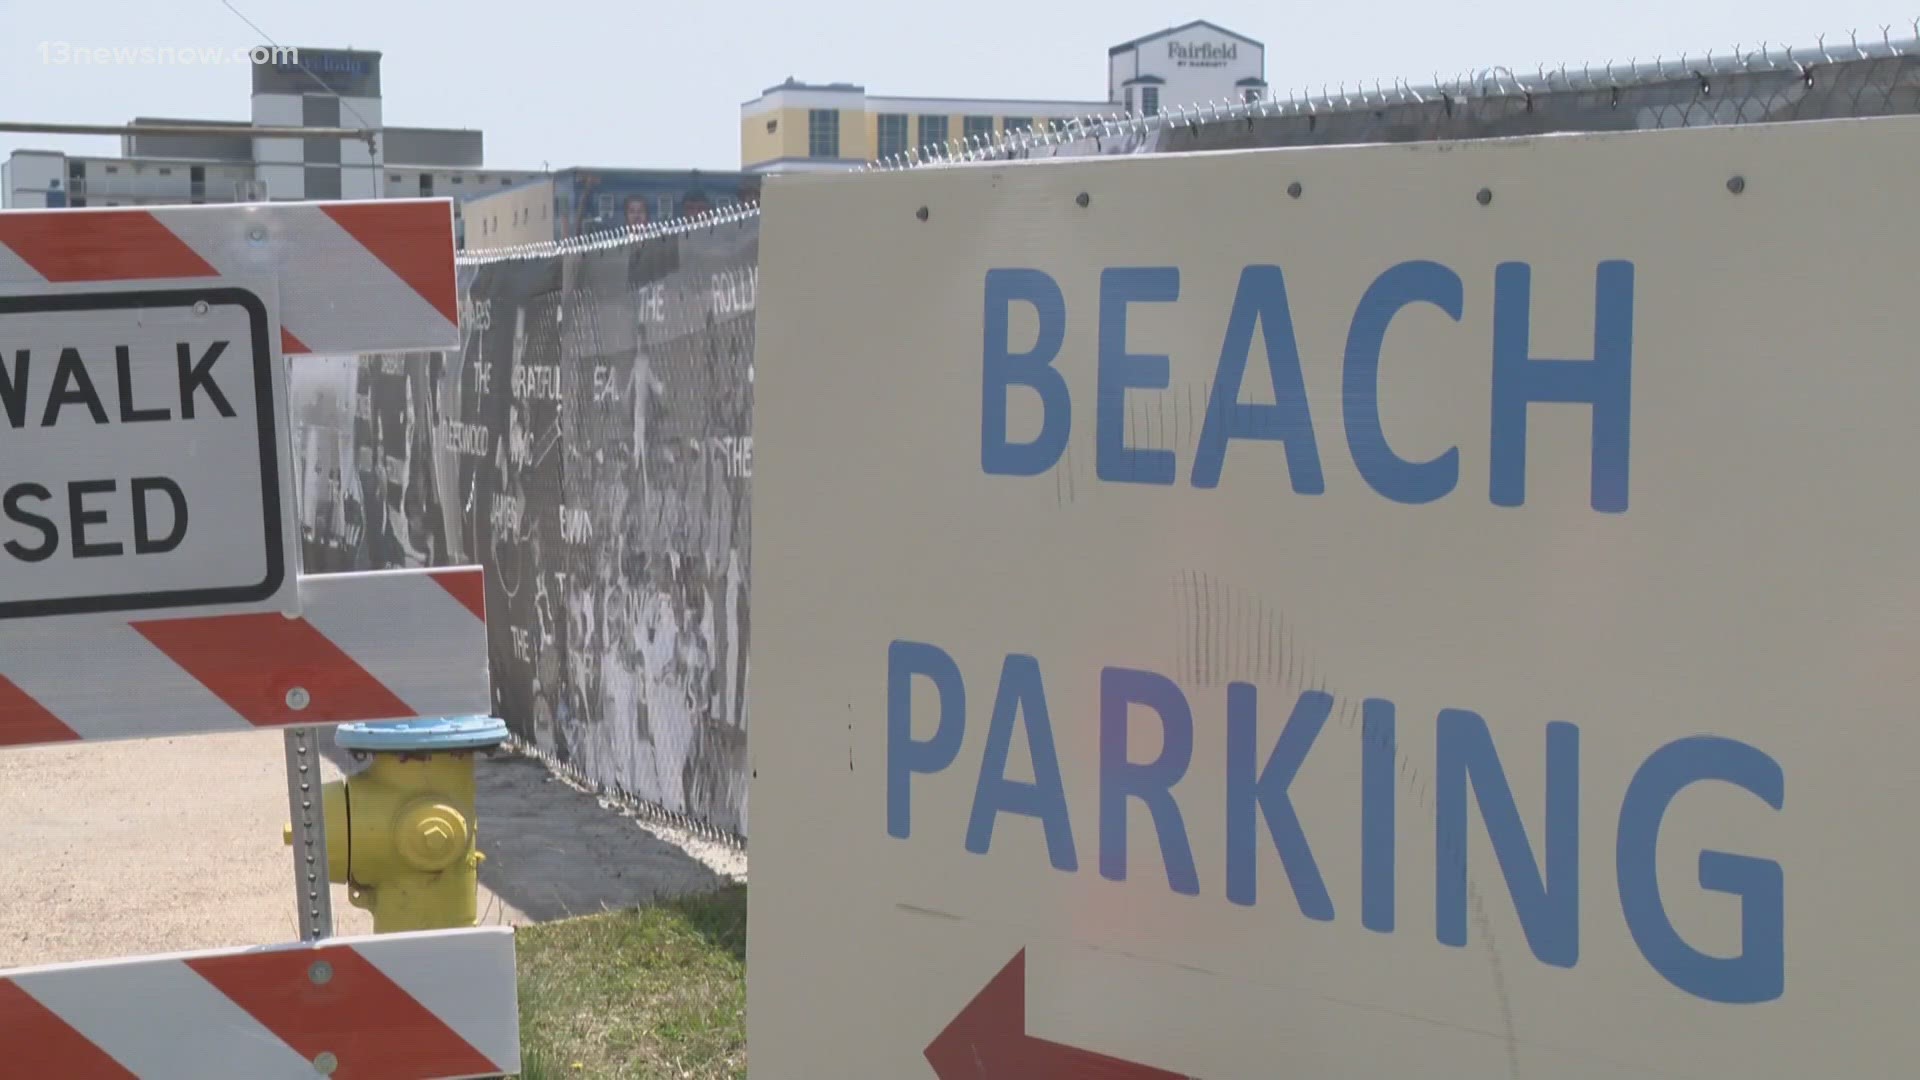 Construction is underway for the planned surf park backed by Virginia Beach native and Grammy winner Pharrell Williams.